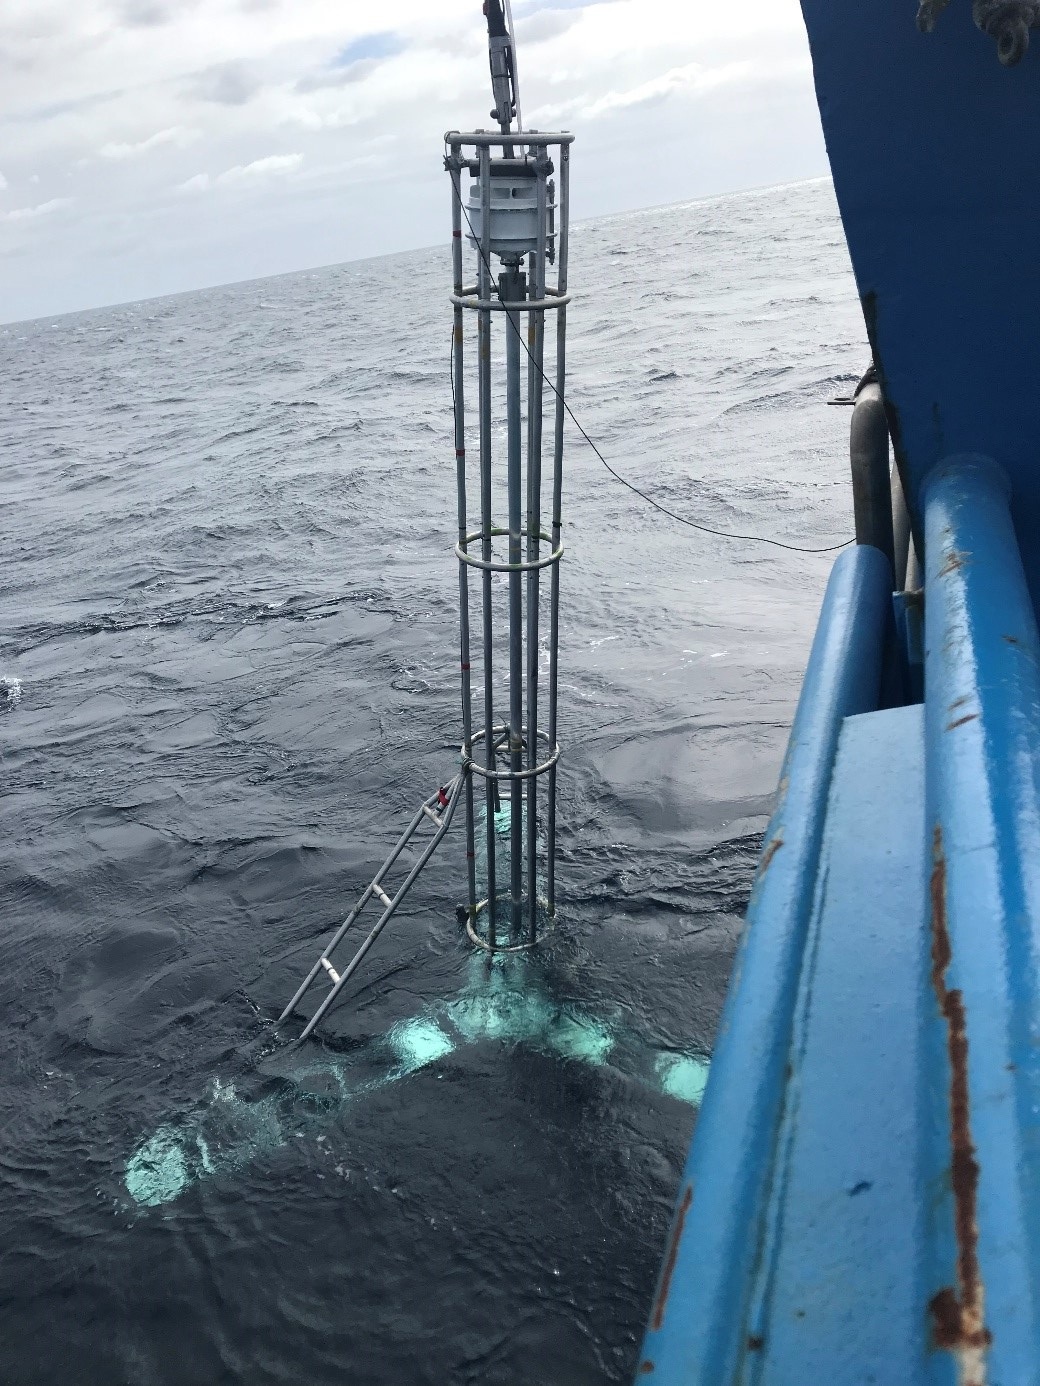 Geoscience Australia’s shallow-water vibrocoring system being deployed on the RV Invesigator